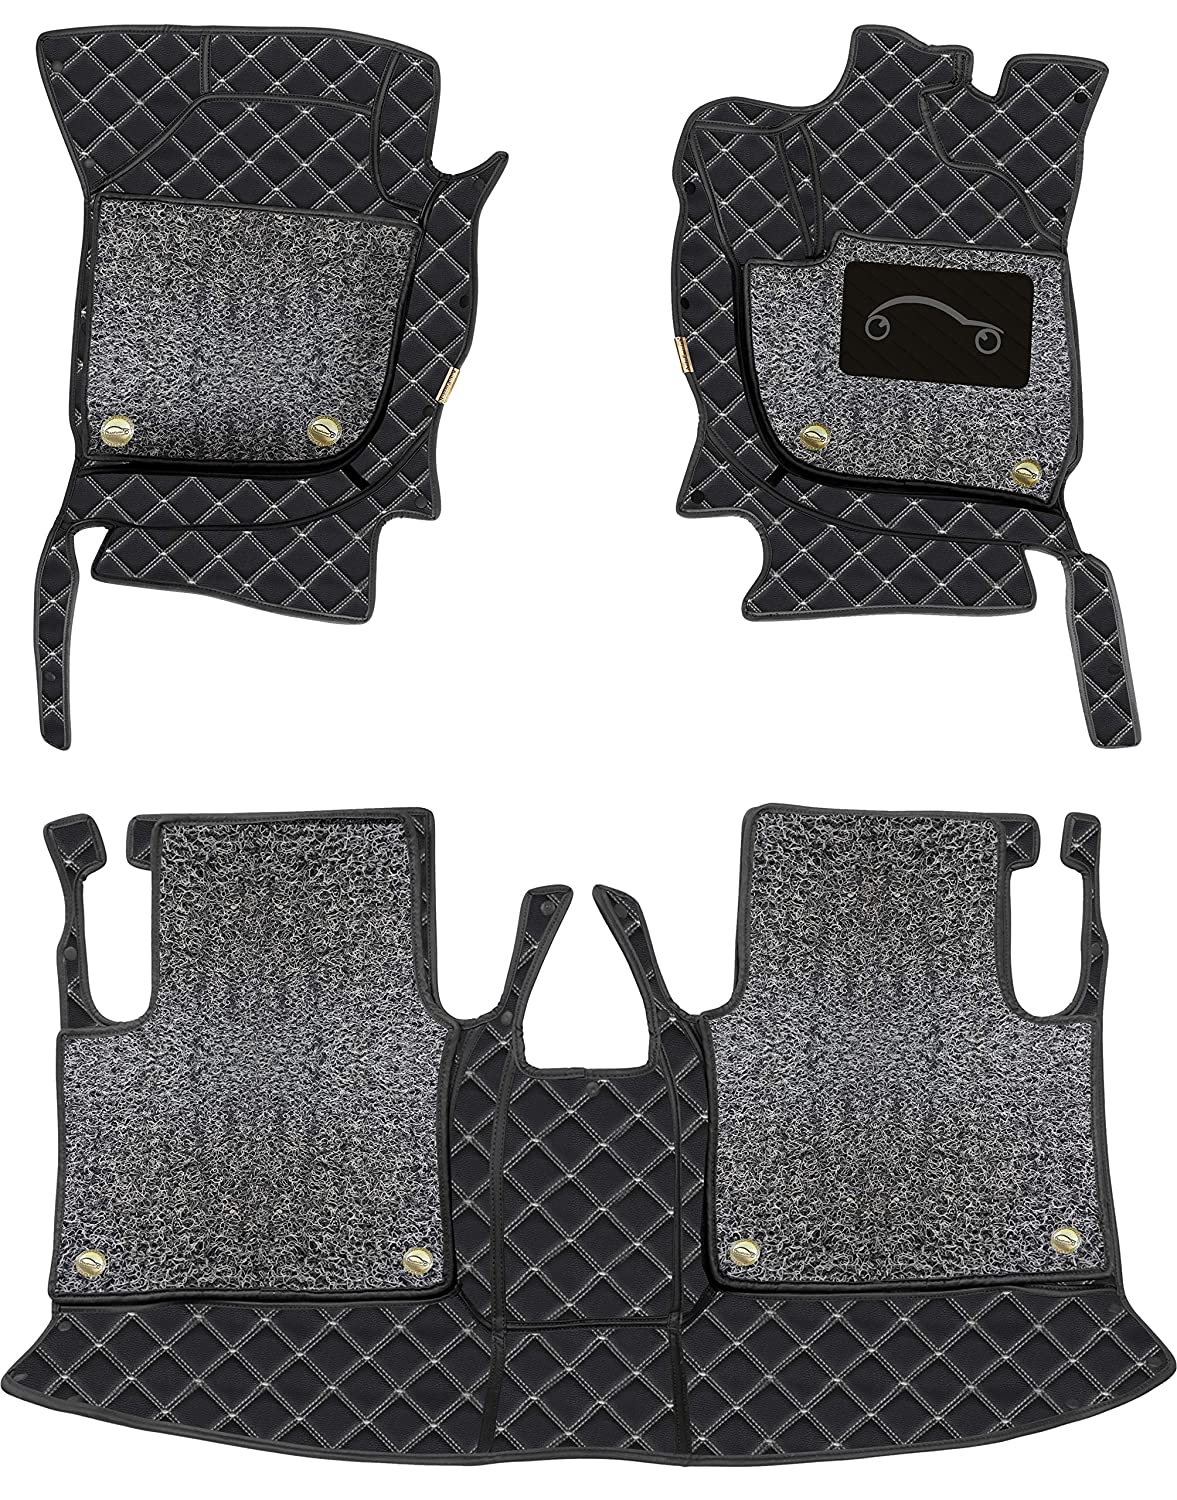 Audi R8 2015 7D Luxury Car Mat, All Weather Proof, Anti-Skid, 100% Waterproof & Odorless with Unique Diamond Fish Design (24mm Luxury PU Leather, 2 Rows)